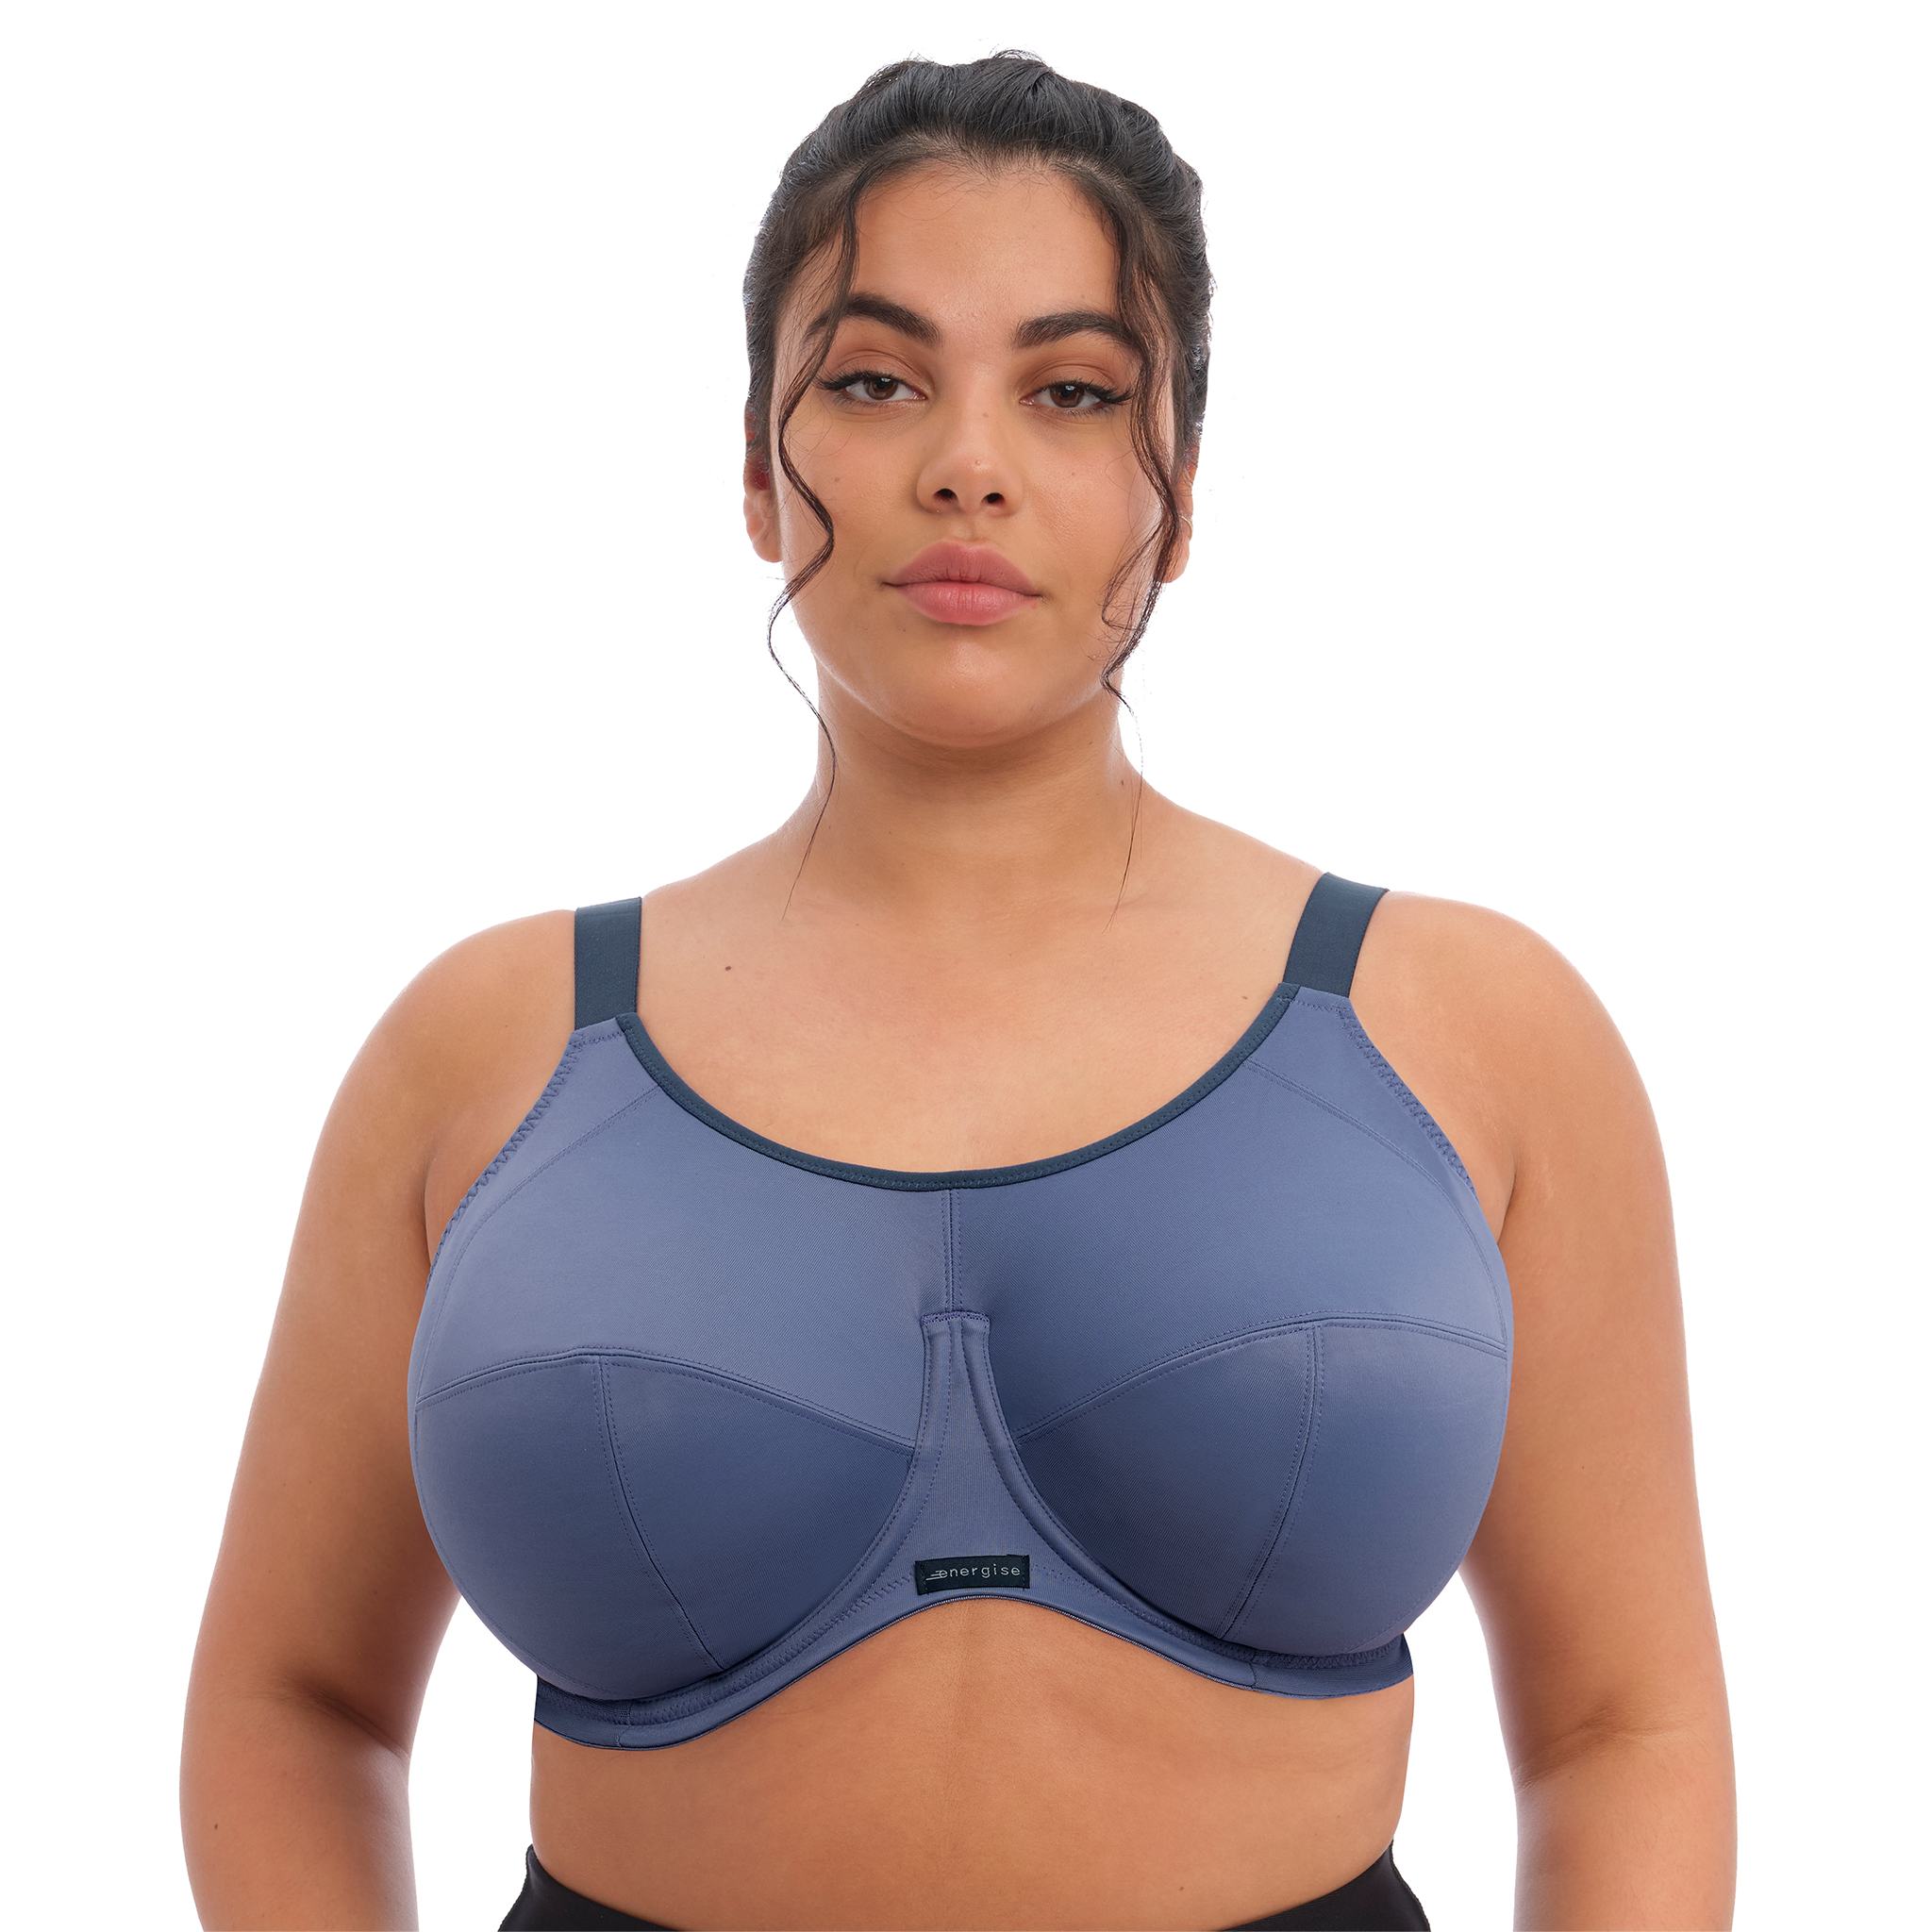 Elomi Womens Energise Underwire Sports Bra with J Hook, 36J, Nude